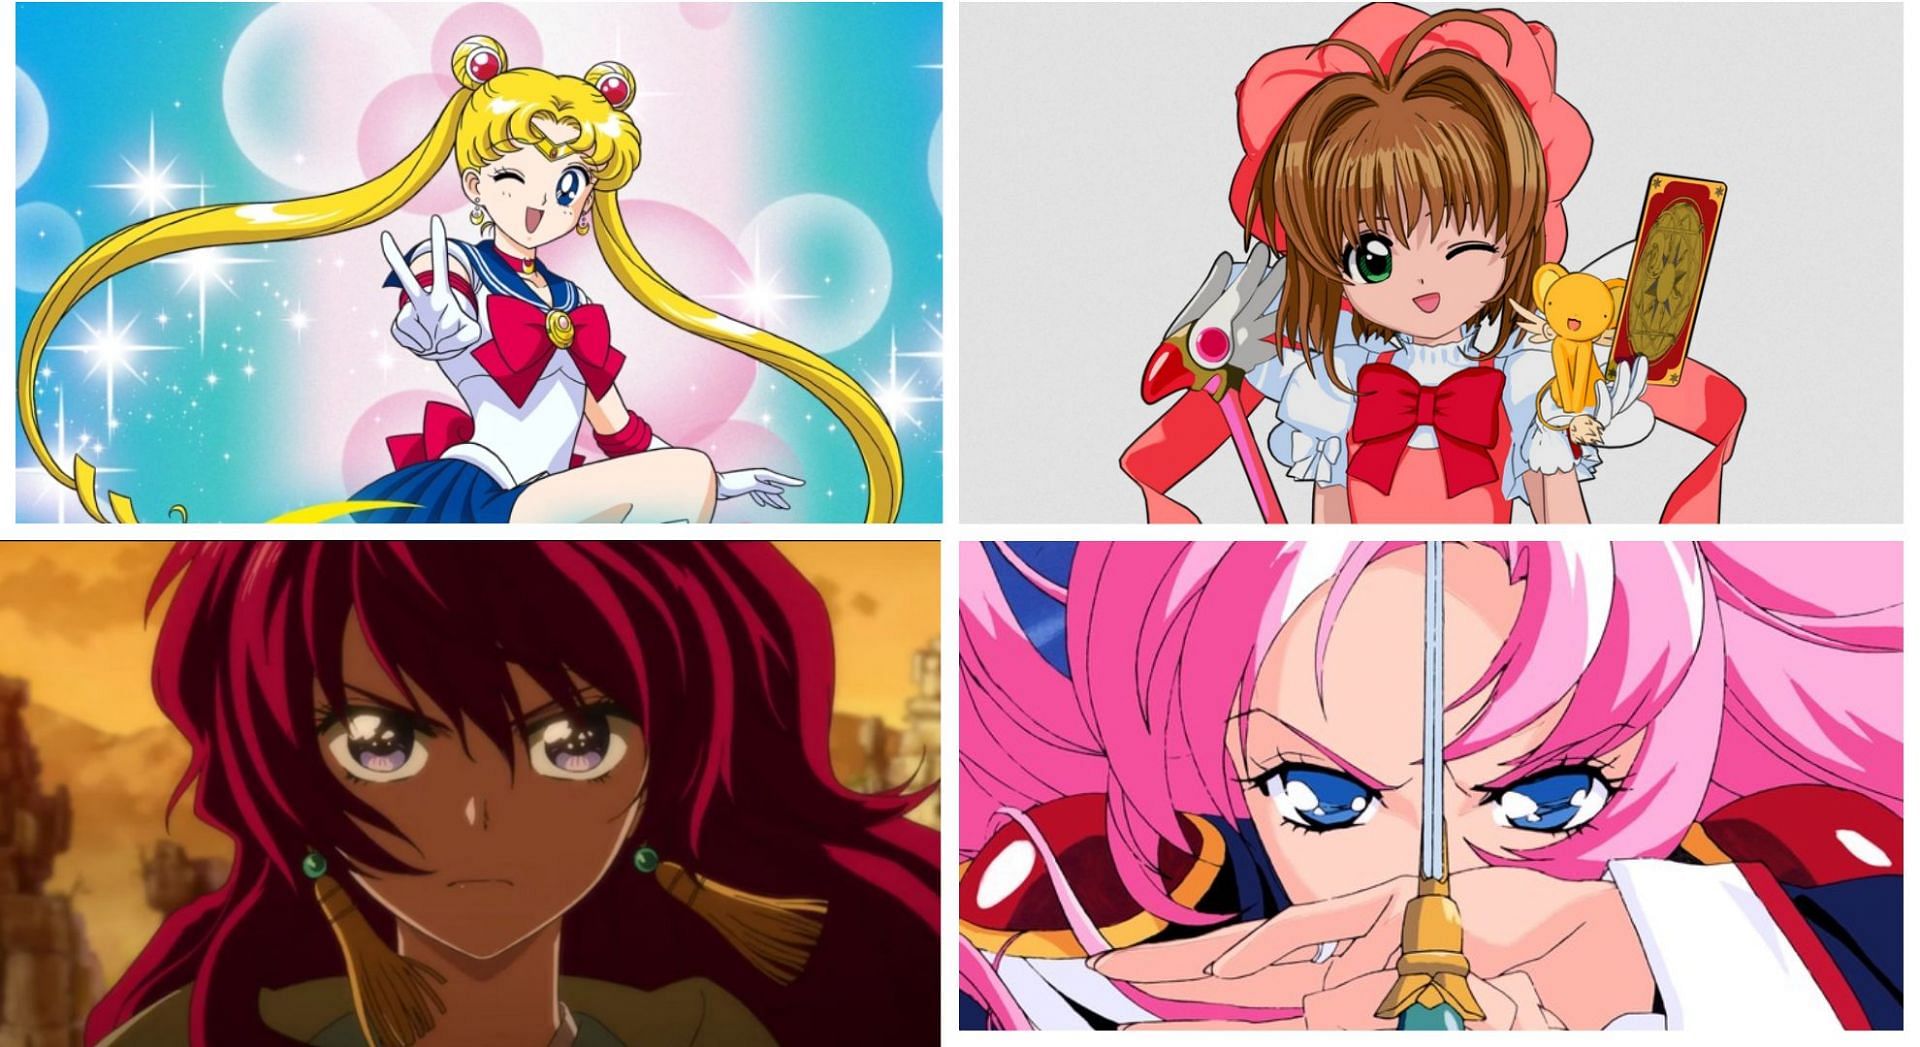 10 Most Popular Anime Girls of All Time 